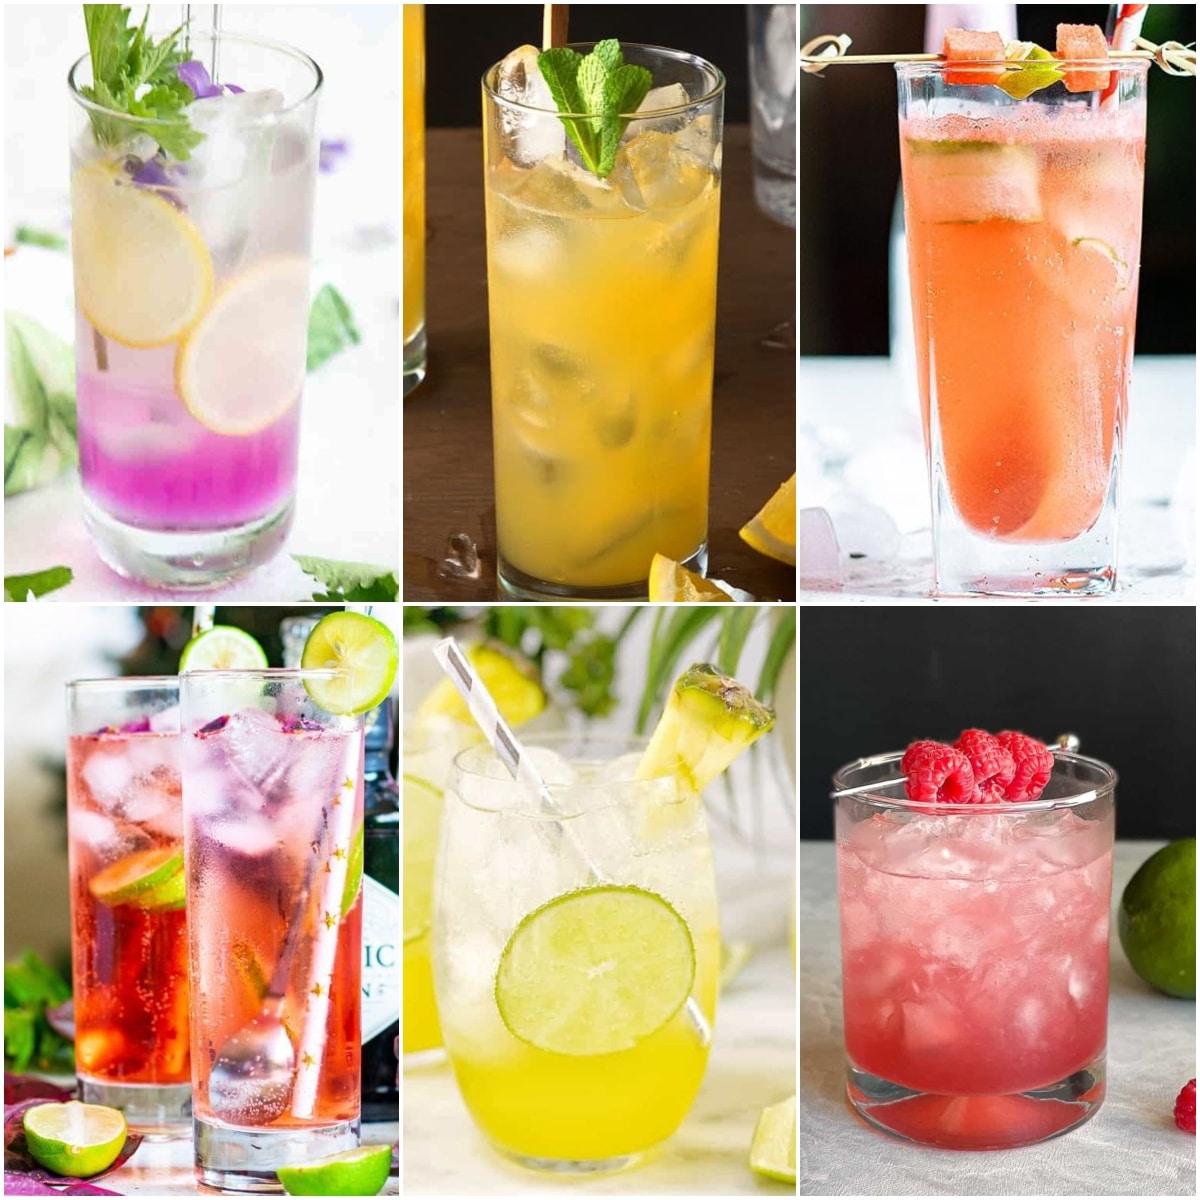 photo collage of cocktails made with gin